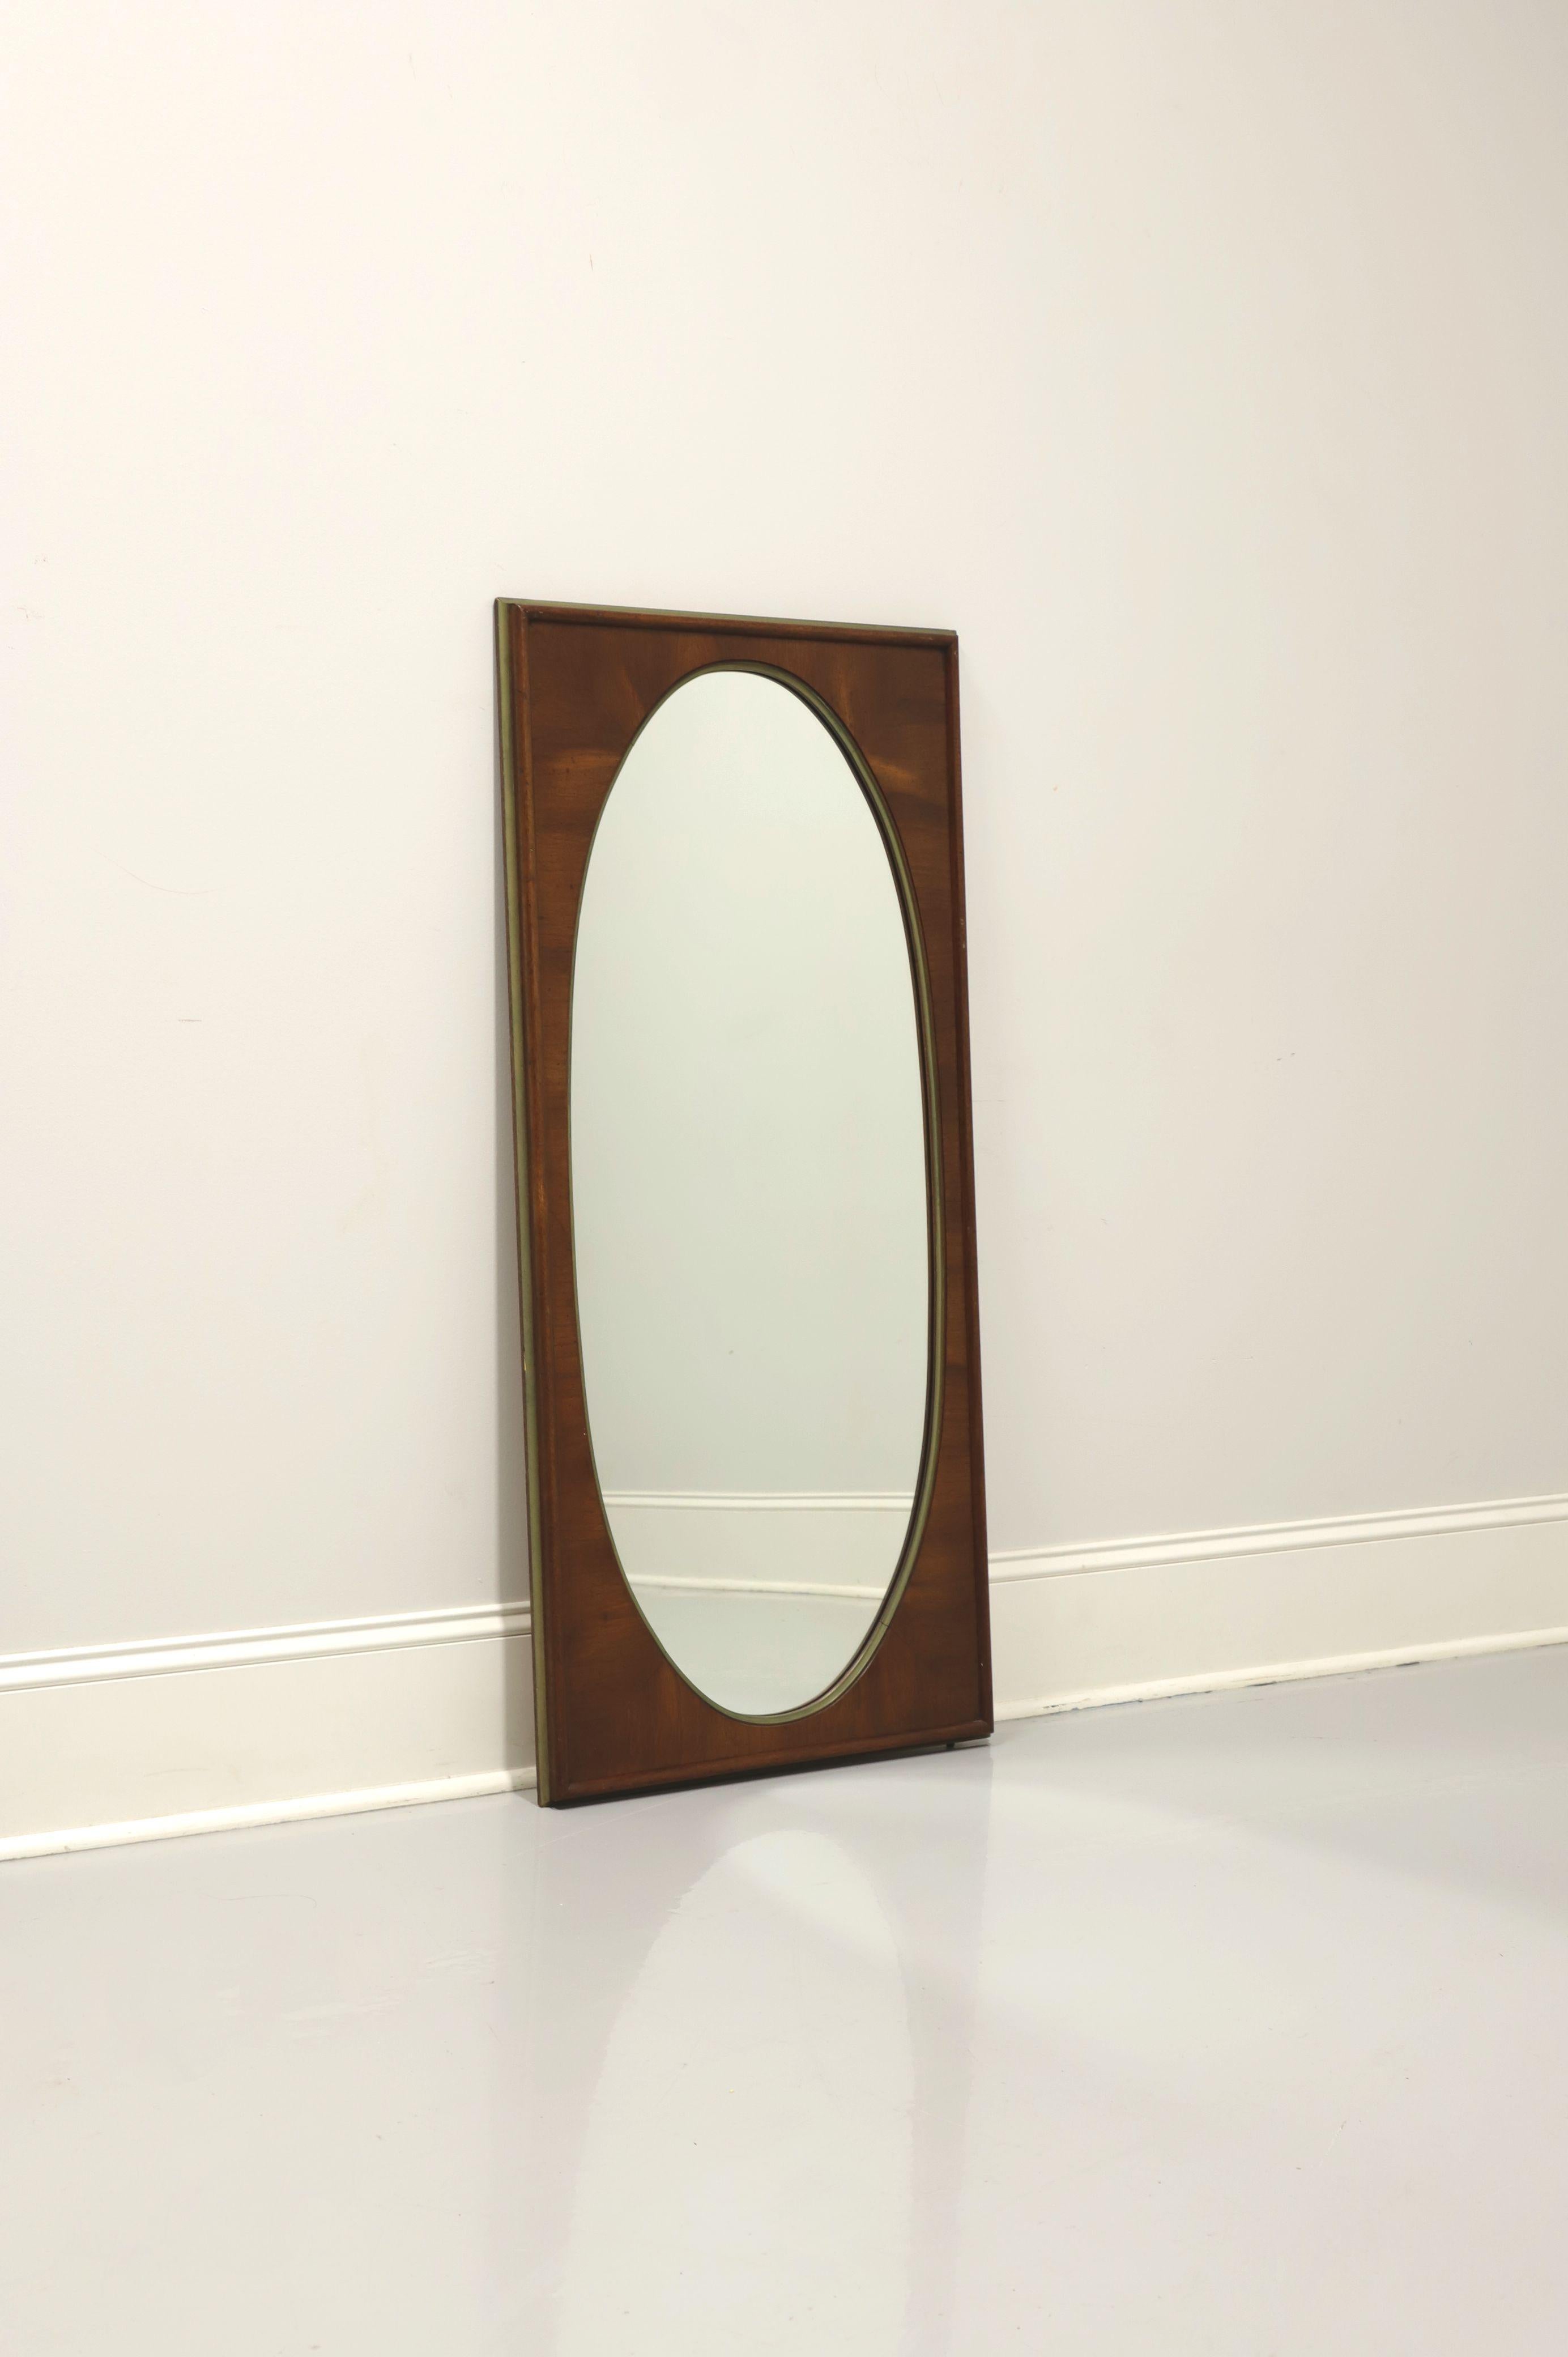 A mid century style wall mirror by White Furniture. Oval shaped mirrored glass and solid rectangular wood frame with their 